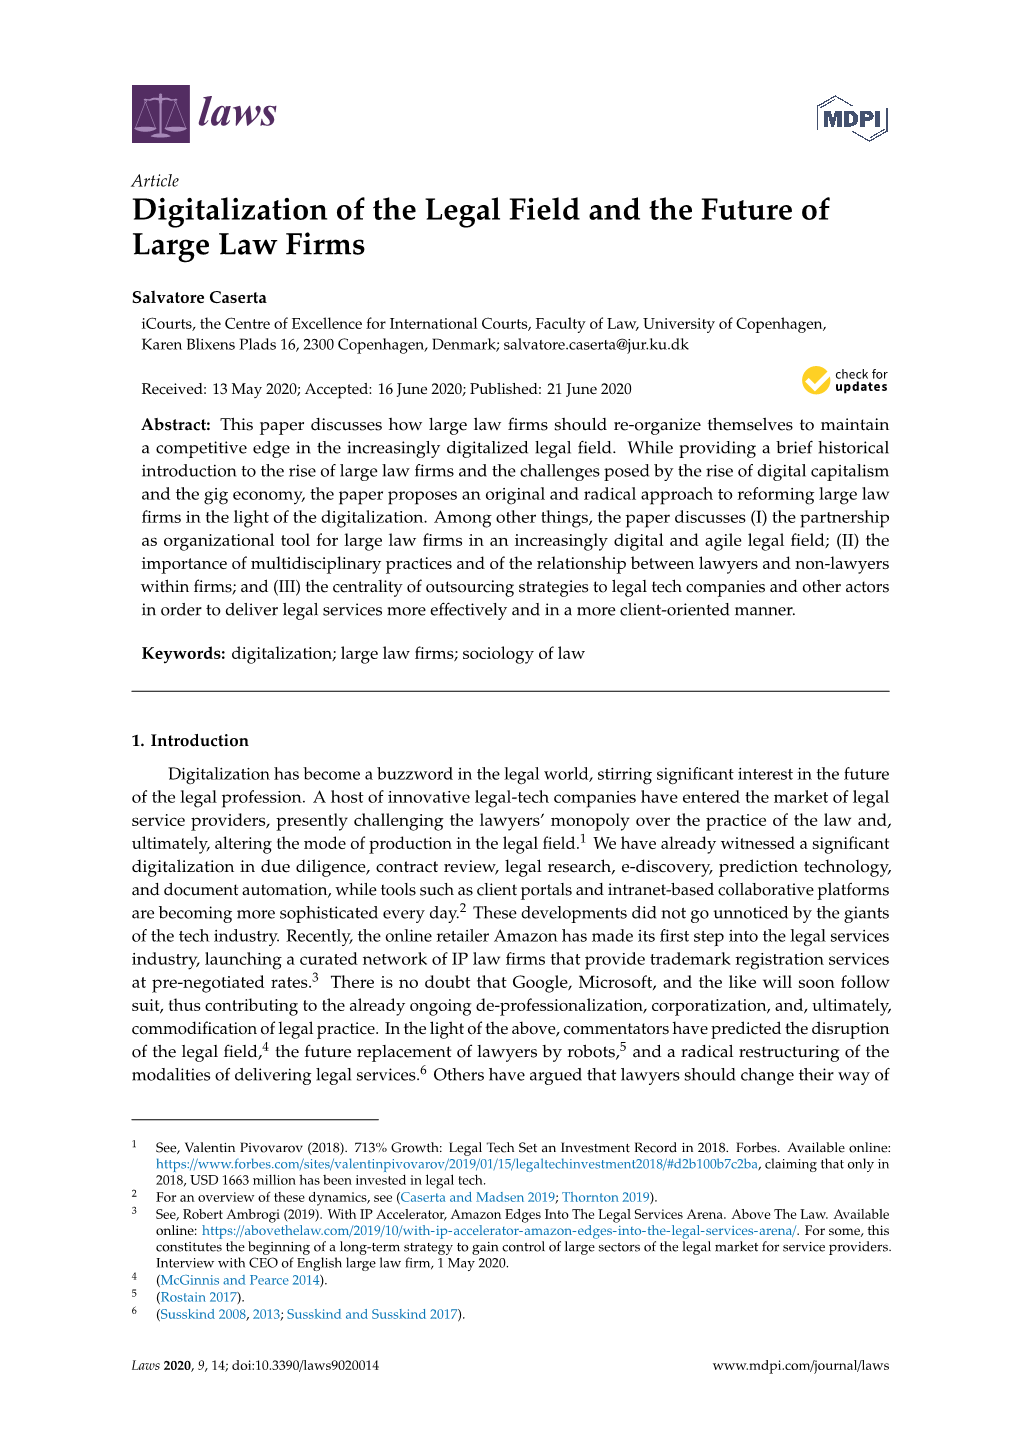 Digitalization of the Legal Field and the Future of Large Law Firms